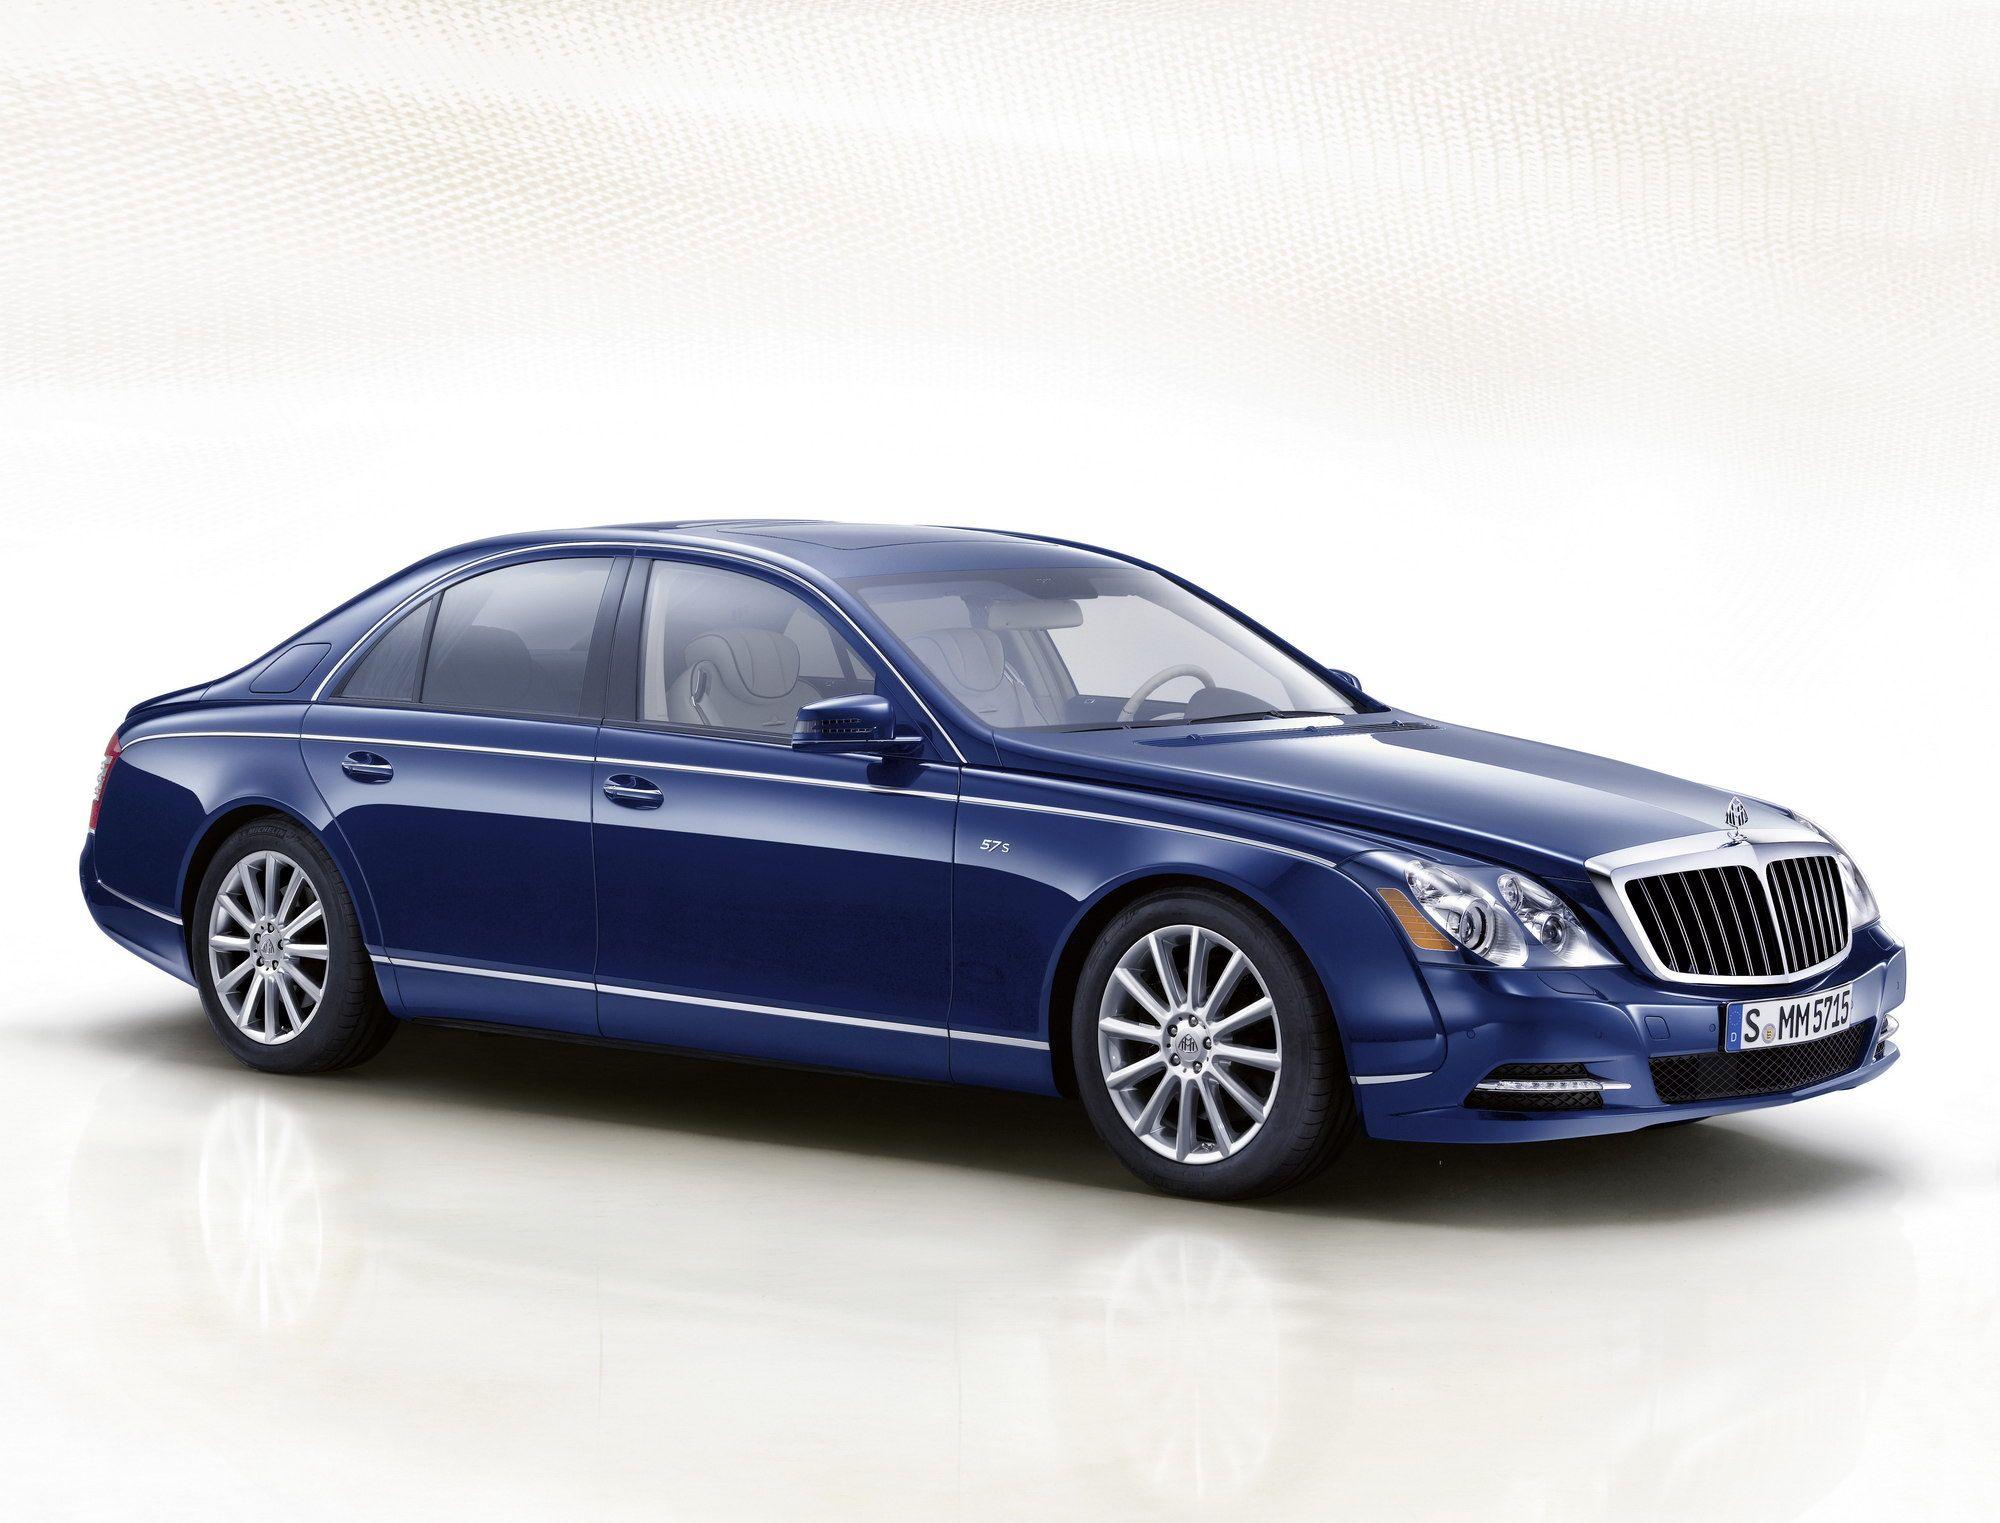 Maybach 57 And 62 Facelift Picture, Photo, Wallpaper. Top